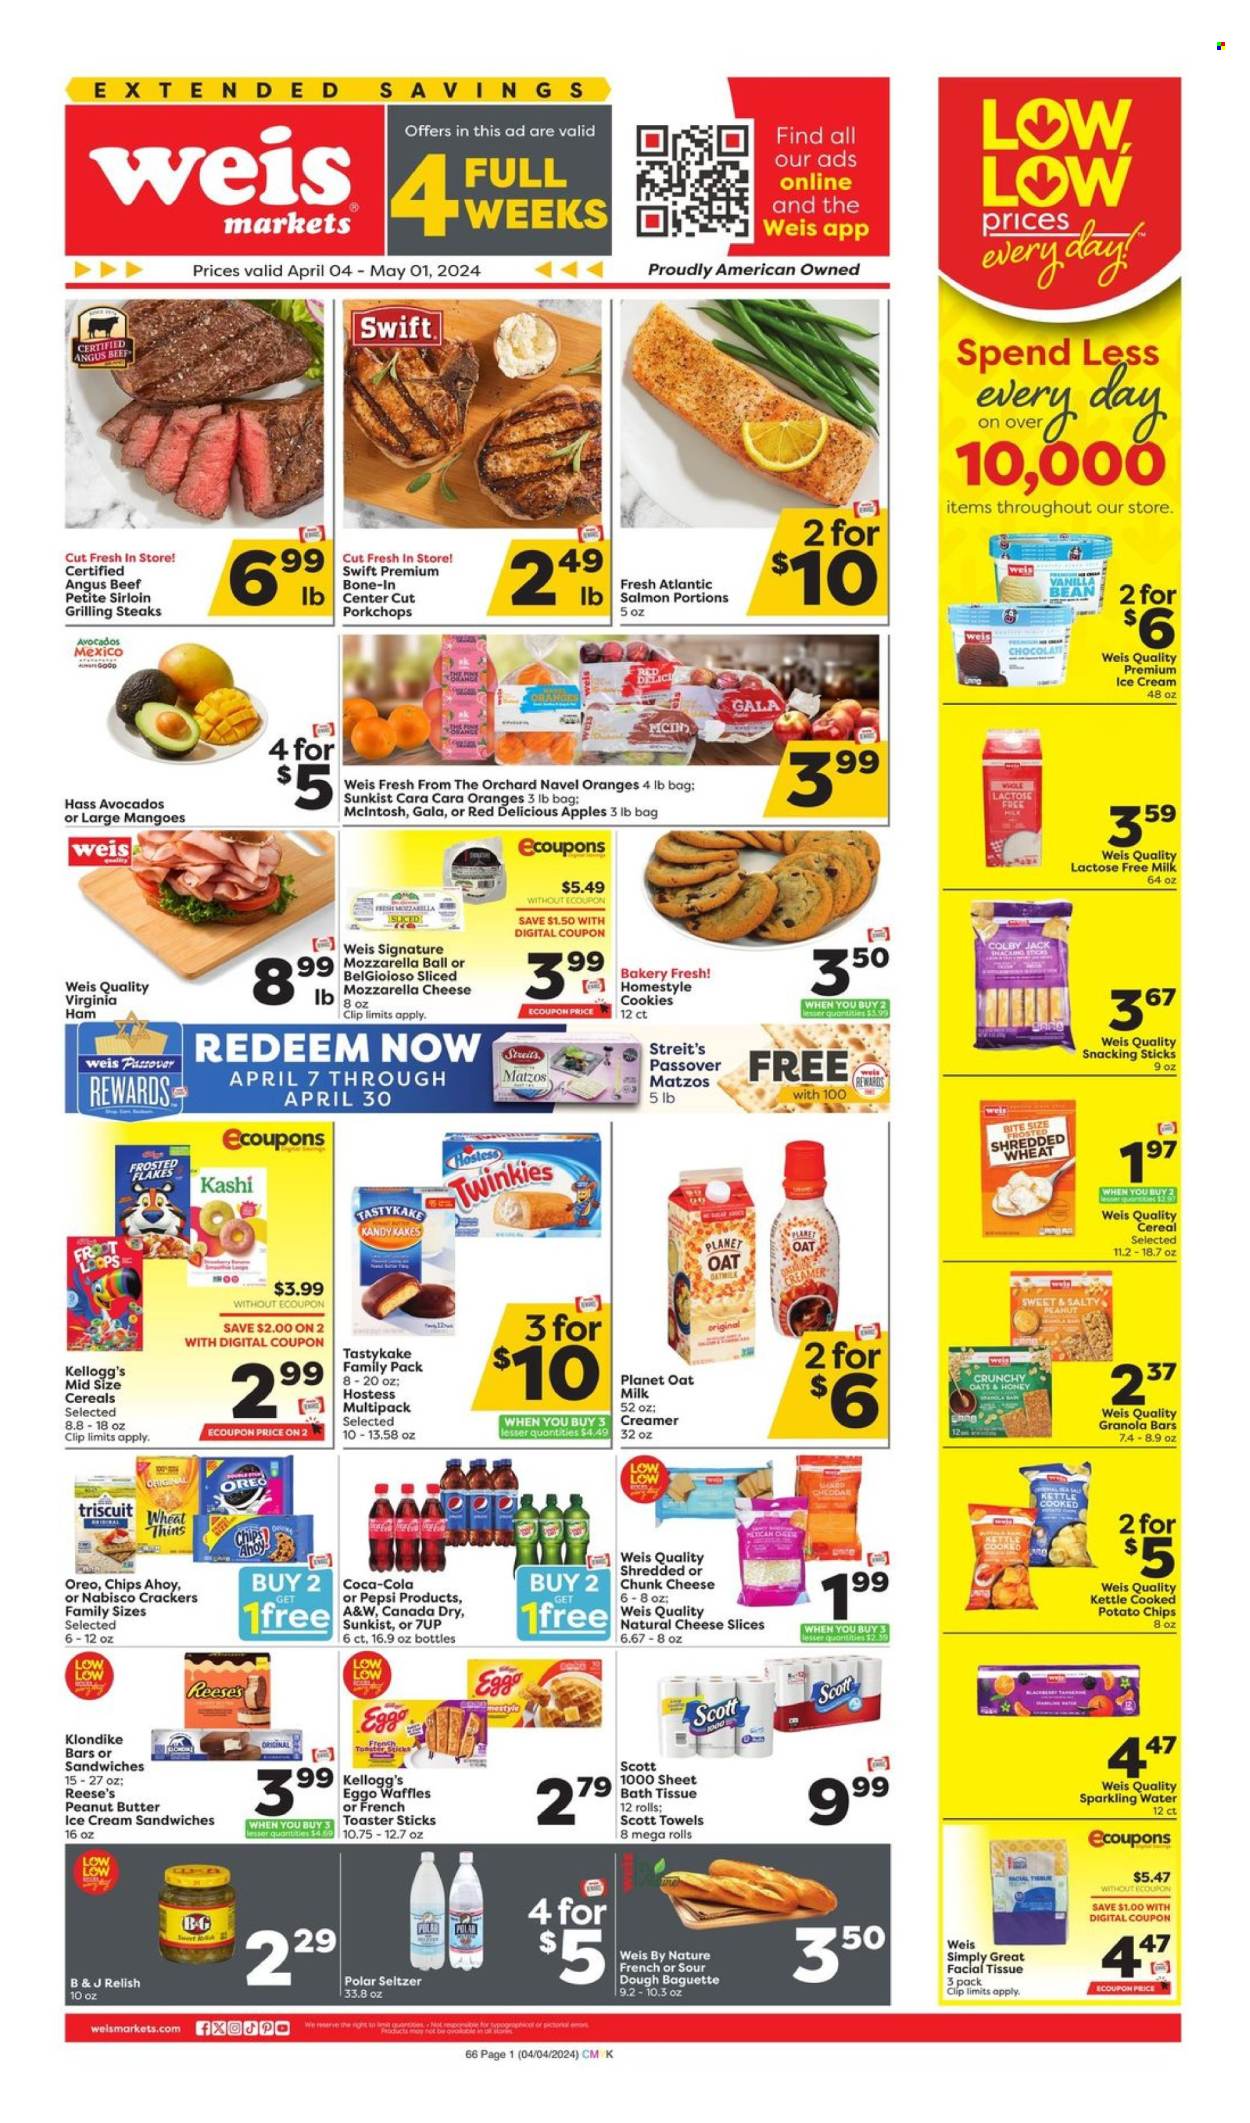 thumbnail - Weis Flyer - 04/04/2024 - 05/01/2024 - Sales products - baguette, matzo bread, waffles, avocado, Gala, mandarines, mango, Red Delicious apples, oranges, steak, salmon, snack, ham, virginia ham, Colby cheese, mozzarella, sliced cheese, cheese, chunk cheese, Oreo, snack bar, lactose free milk, oat milk, plant-based milk, creamer, ice cream, ice cream sandwich, Reese's, crackers, Kellogg's, snack cake, Nabisco, breakfast bar, potato chips, Thins, salty snack, relish, granola bar, Frosted Flakes, Canada Dry, Coca-Cola, ginger ale, Pepsi, soft drink, 7UP, A&W, seltzer water, sparkling water, carbonated soft drink, bath tissue, Scott, kitchen towels, paper towels, facial tissues, navel oranges. Page 1.